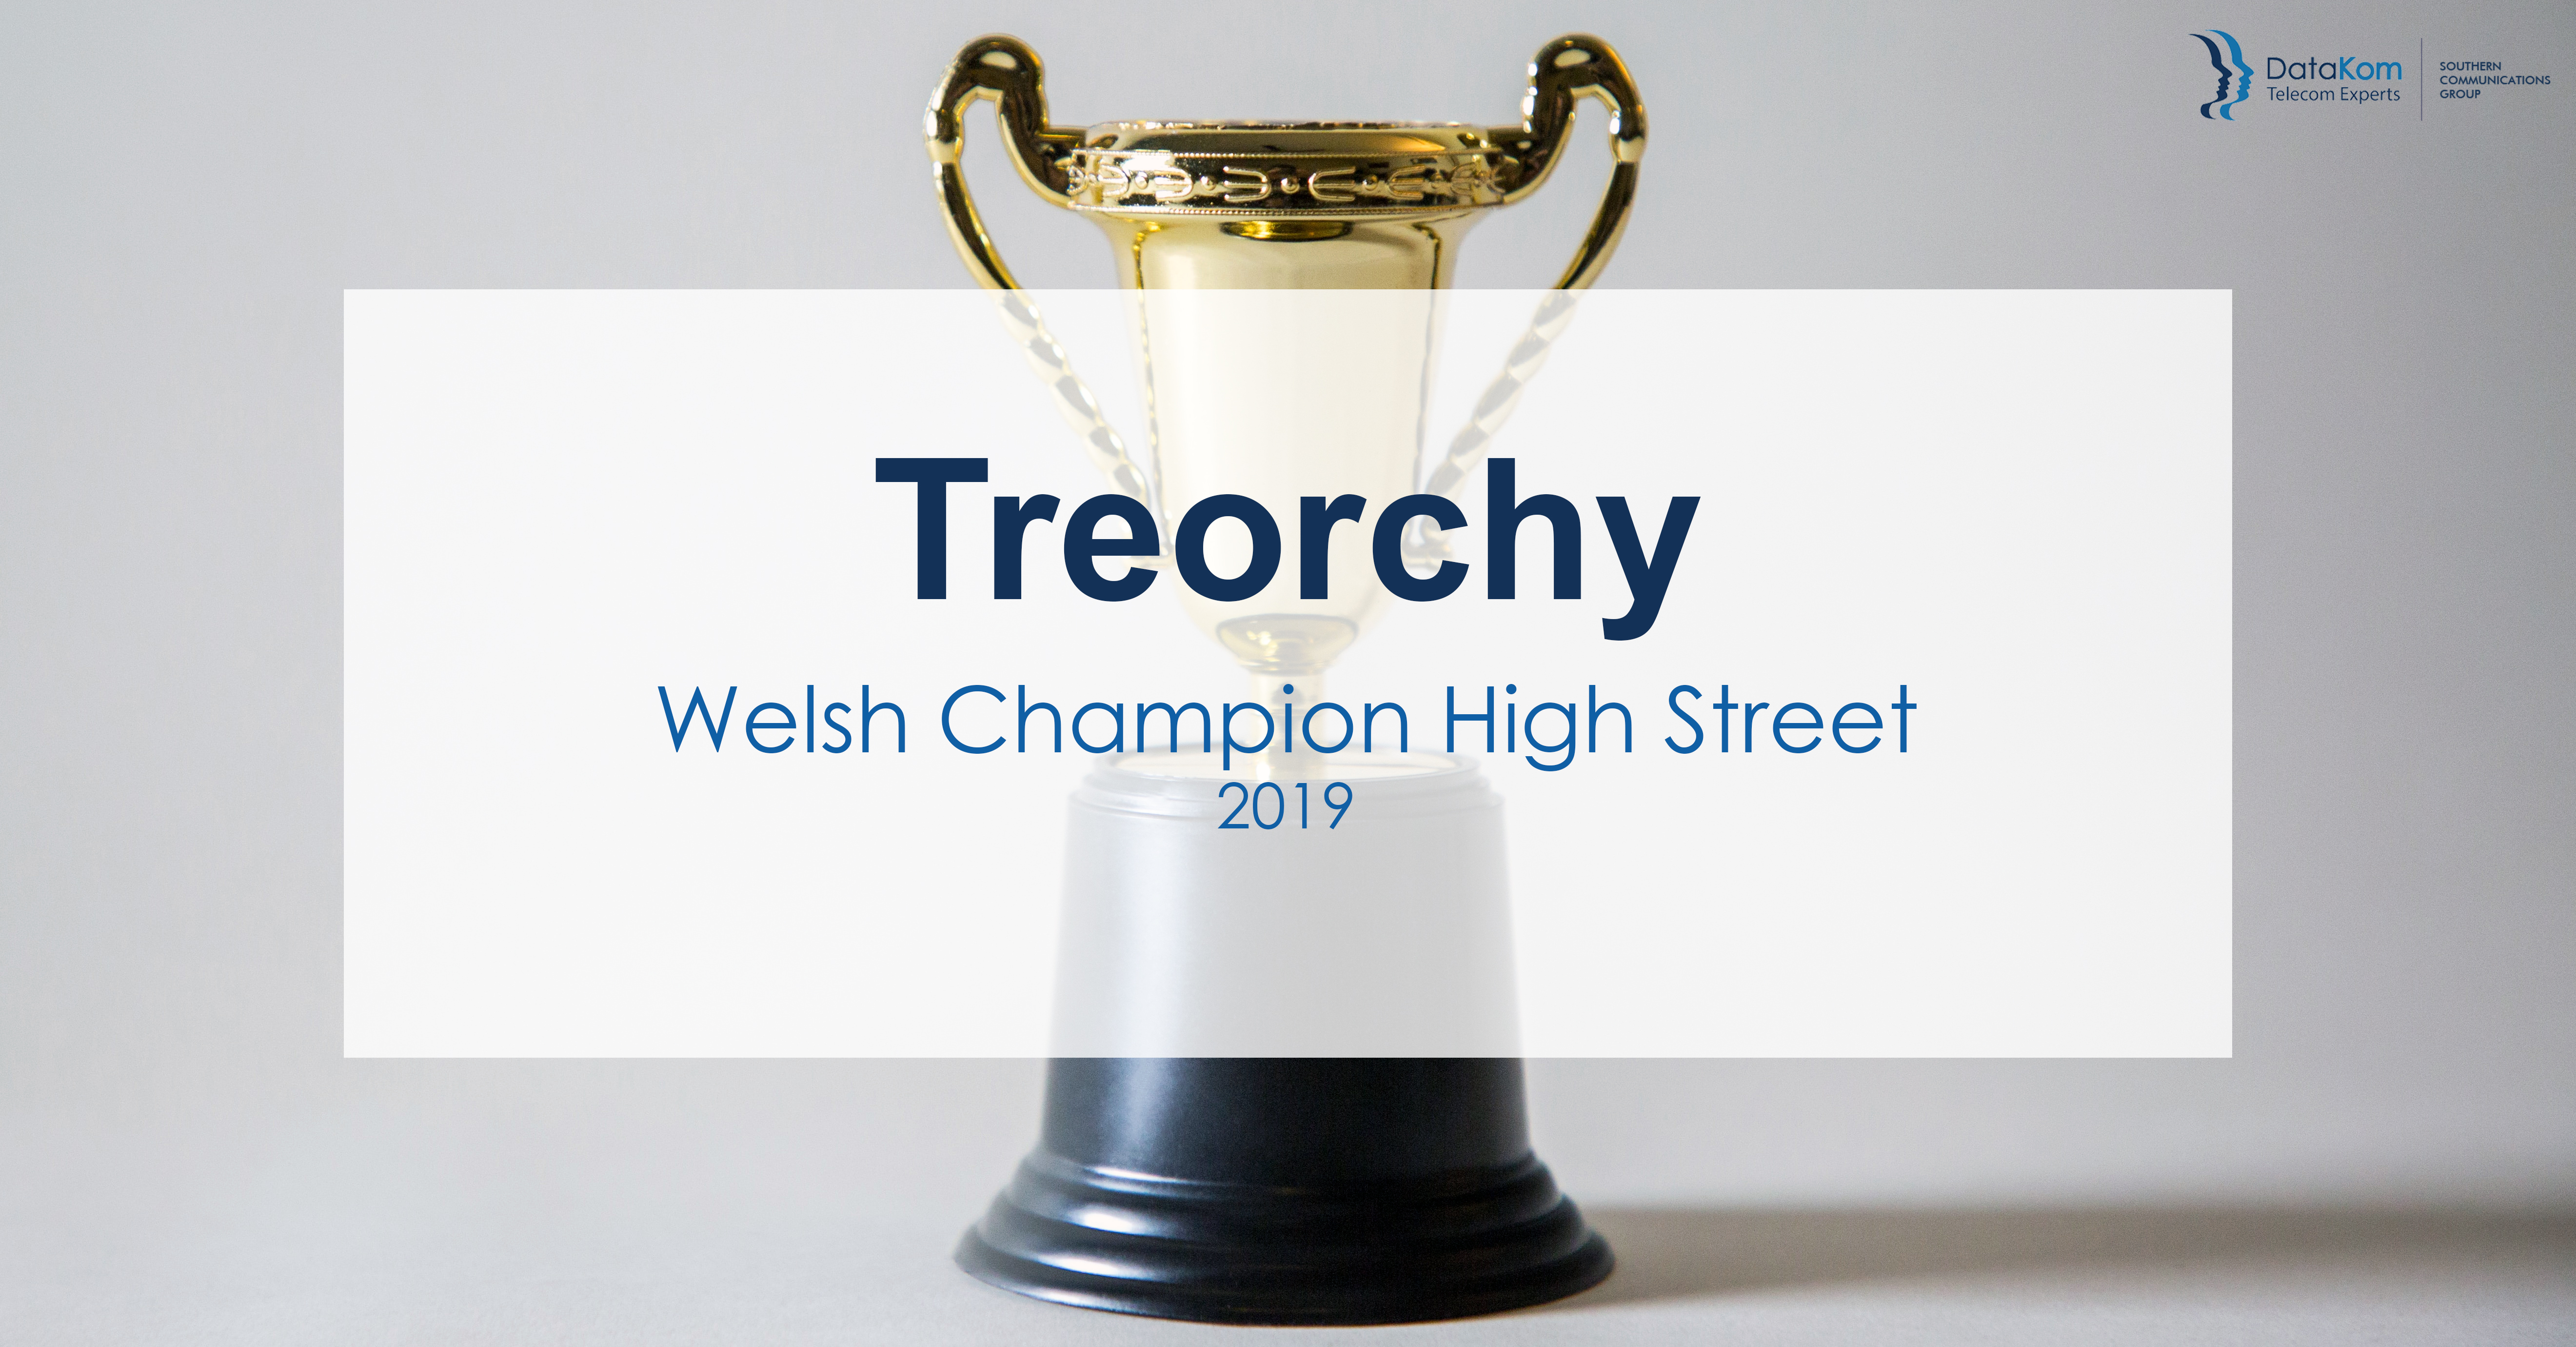 Treorchy awarded Welsh Champion High Street